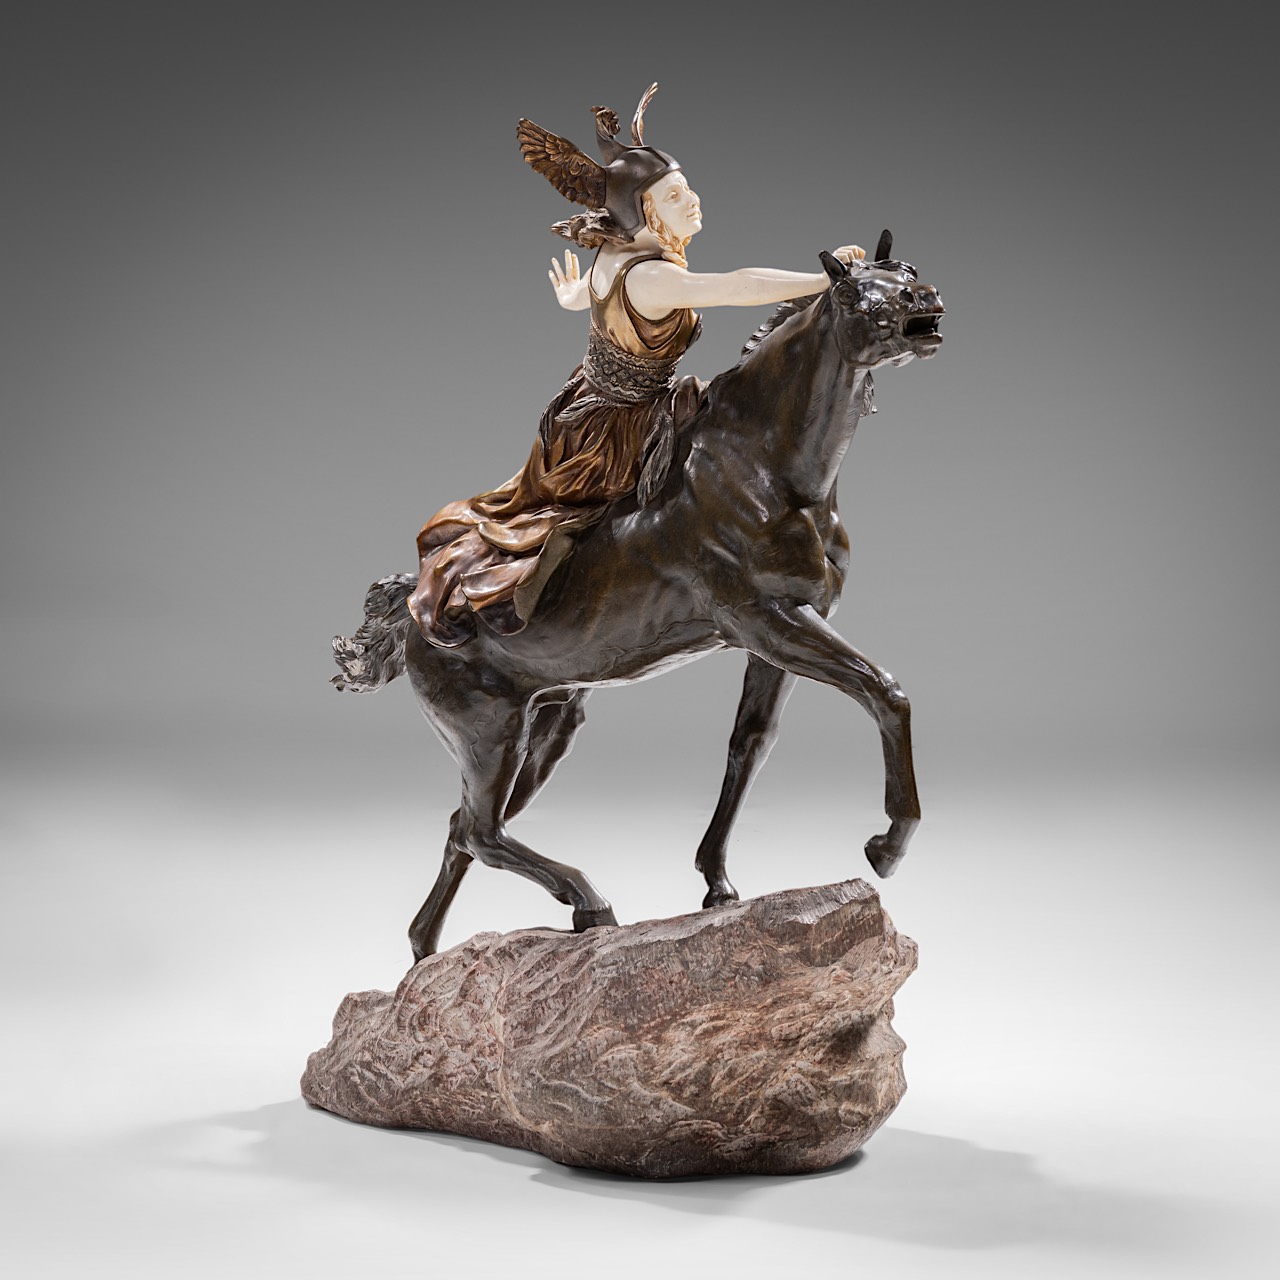 Claire Jeanne Roberte Colinet (1880-1950), 'Valkiria - Towards the Unknown', chryselephantine sculpt - Image 4 of 14